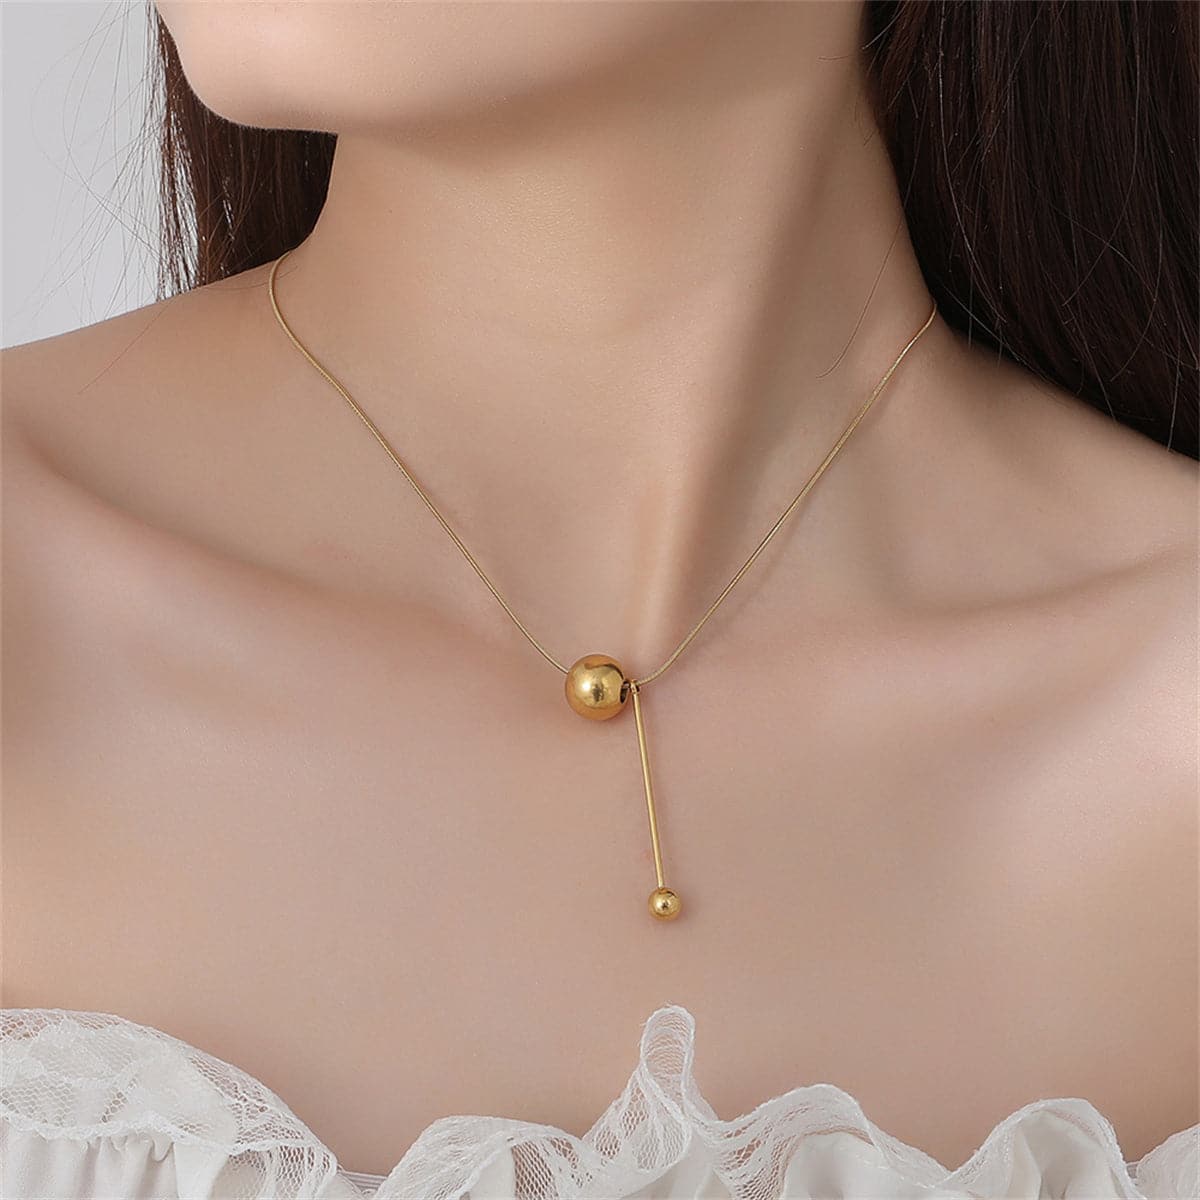 18K Gold-Plated Ball Drop Pendant Necklace